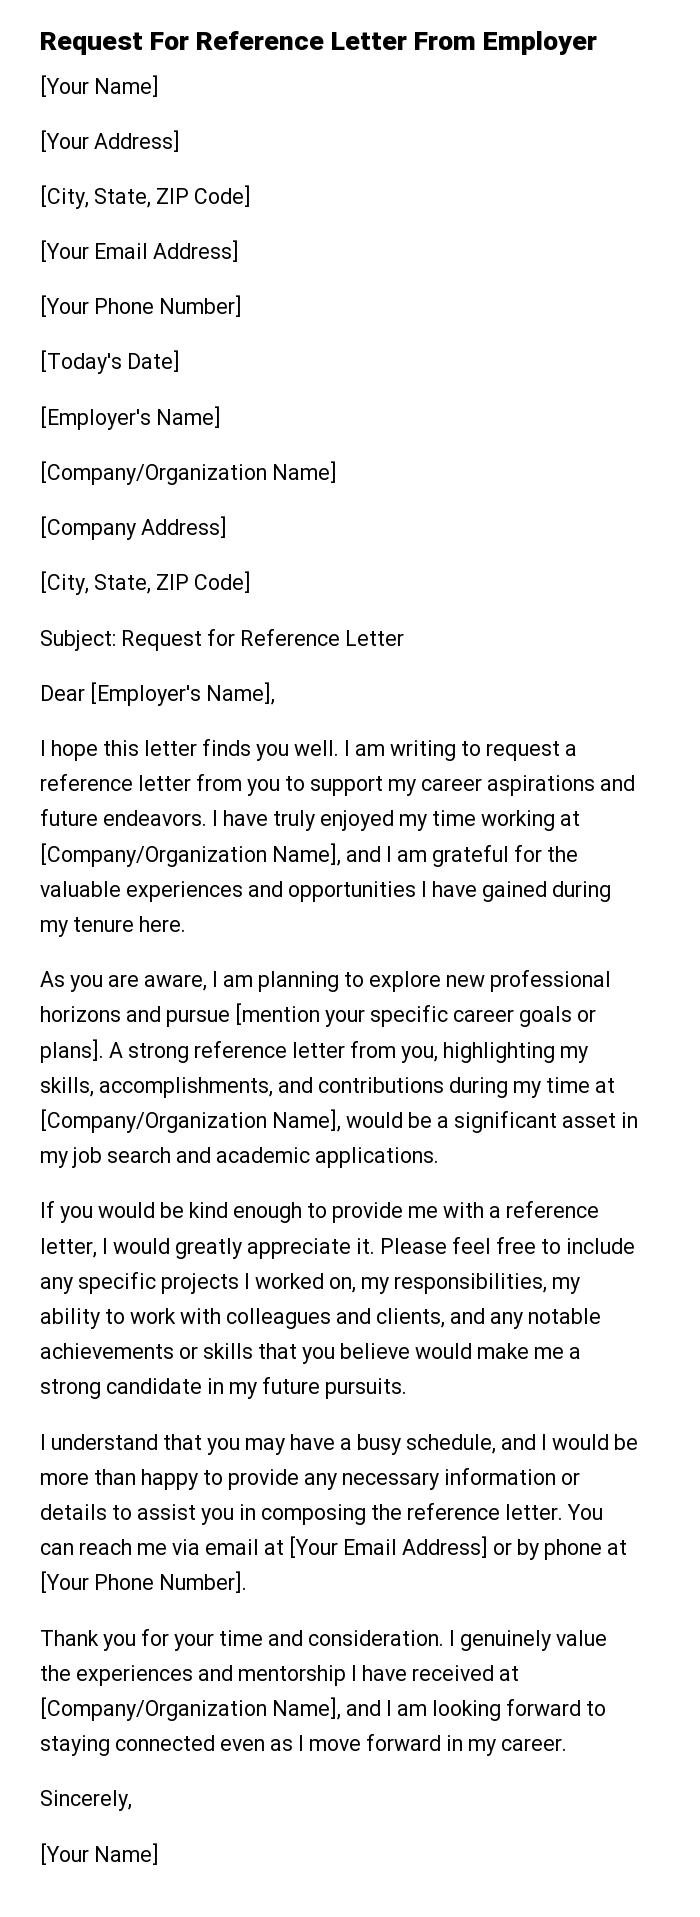 Request For Reference Letter From Employer